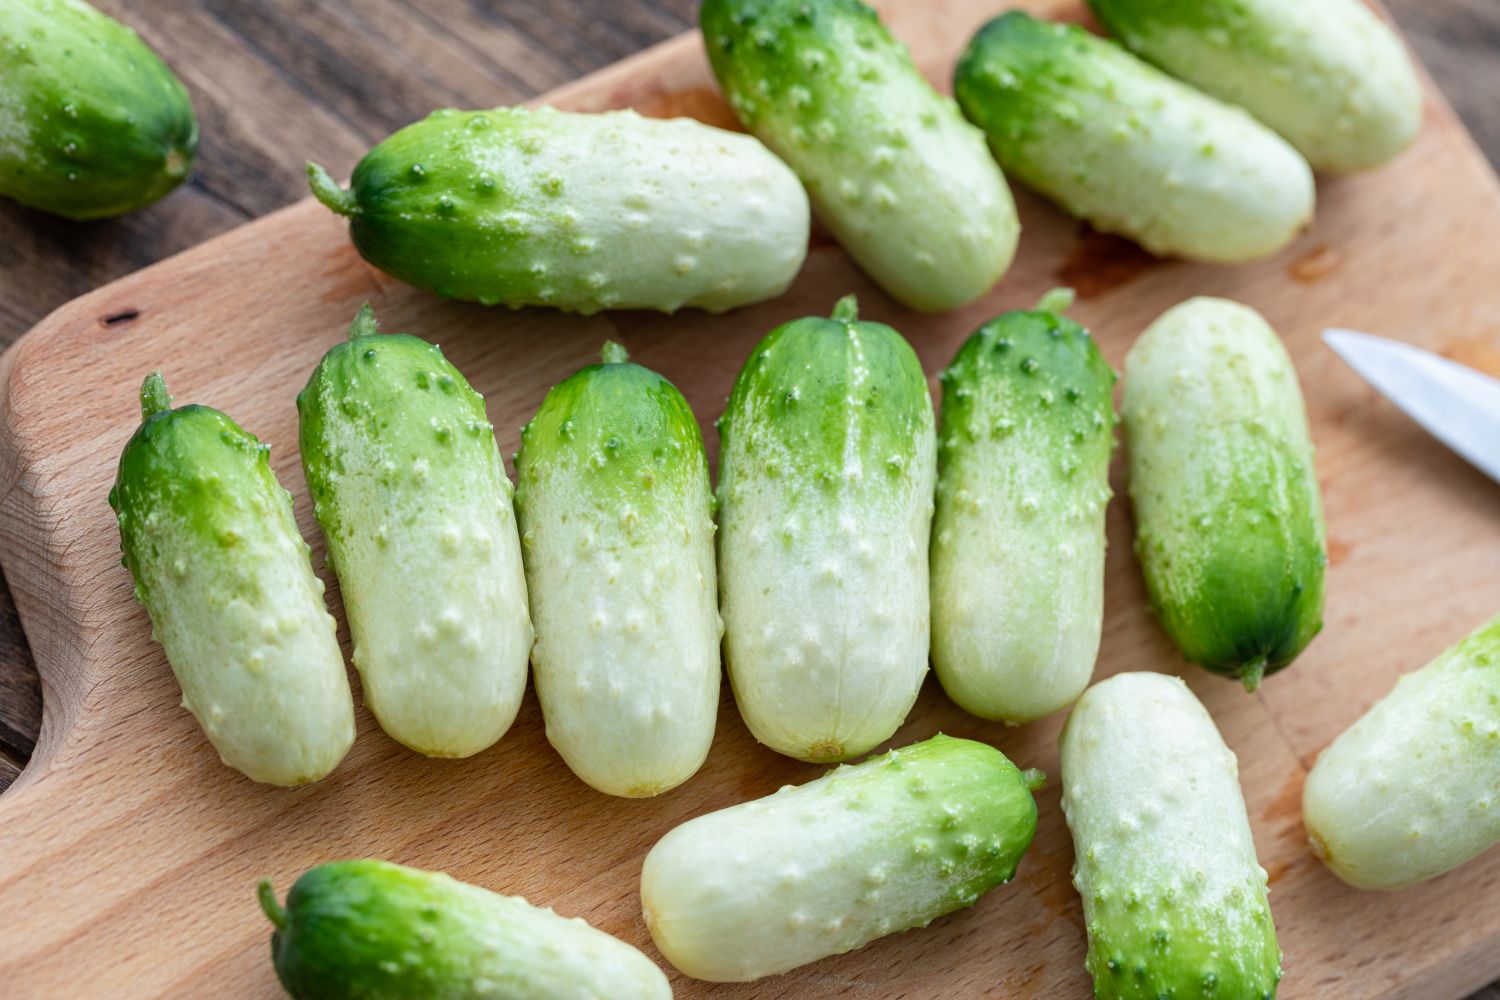 Small, spiny, green and white cucumbers